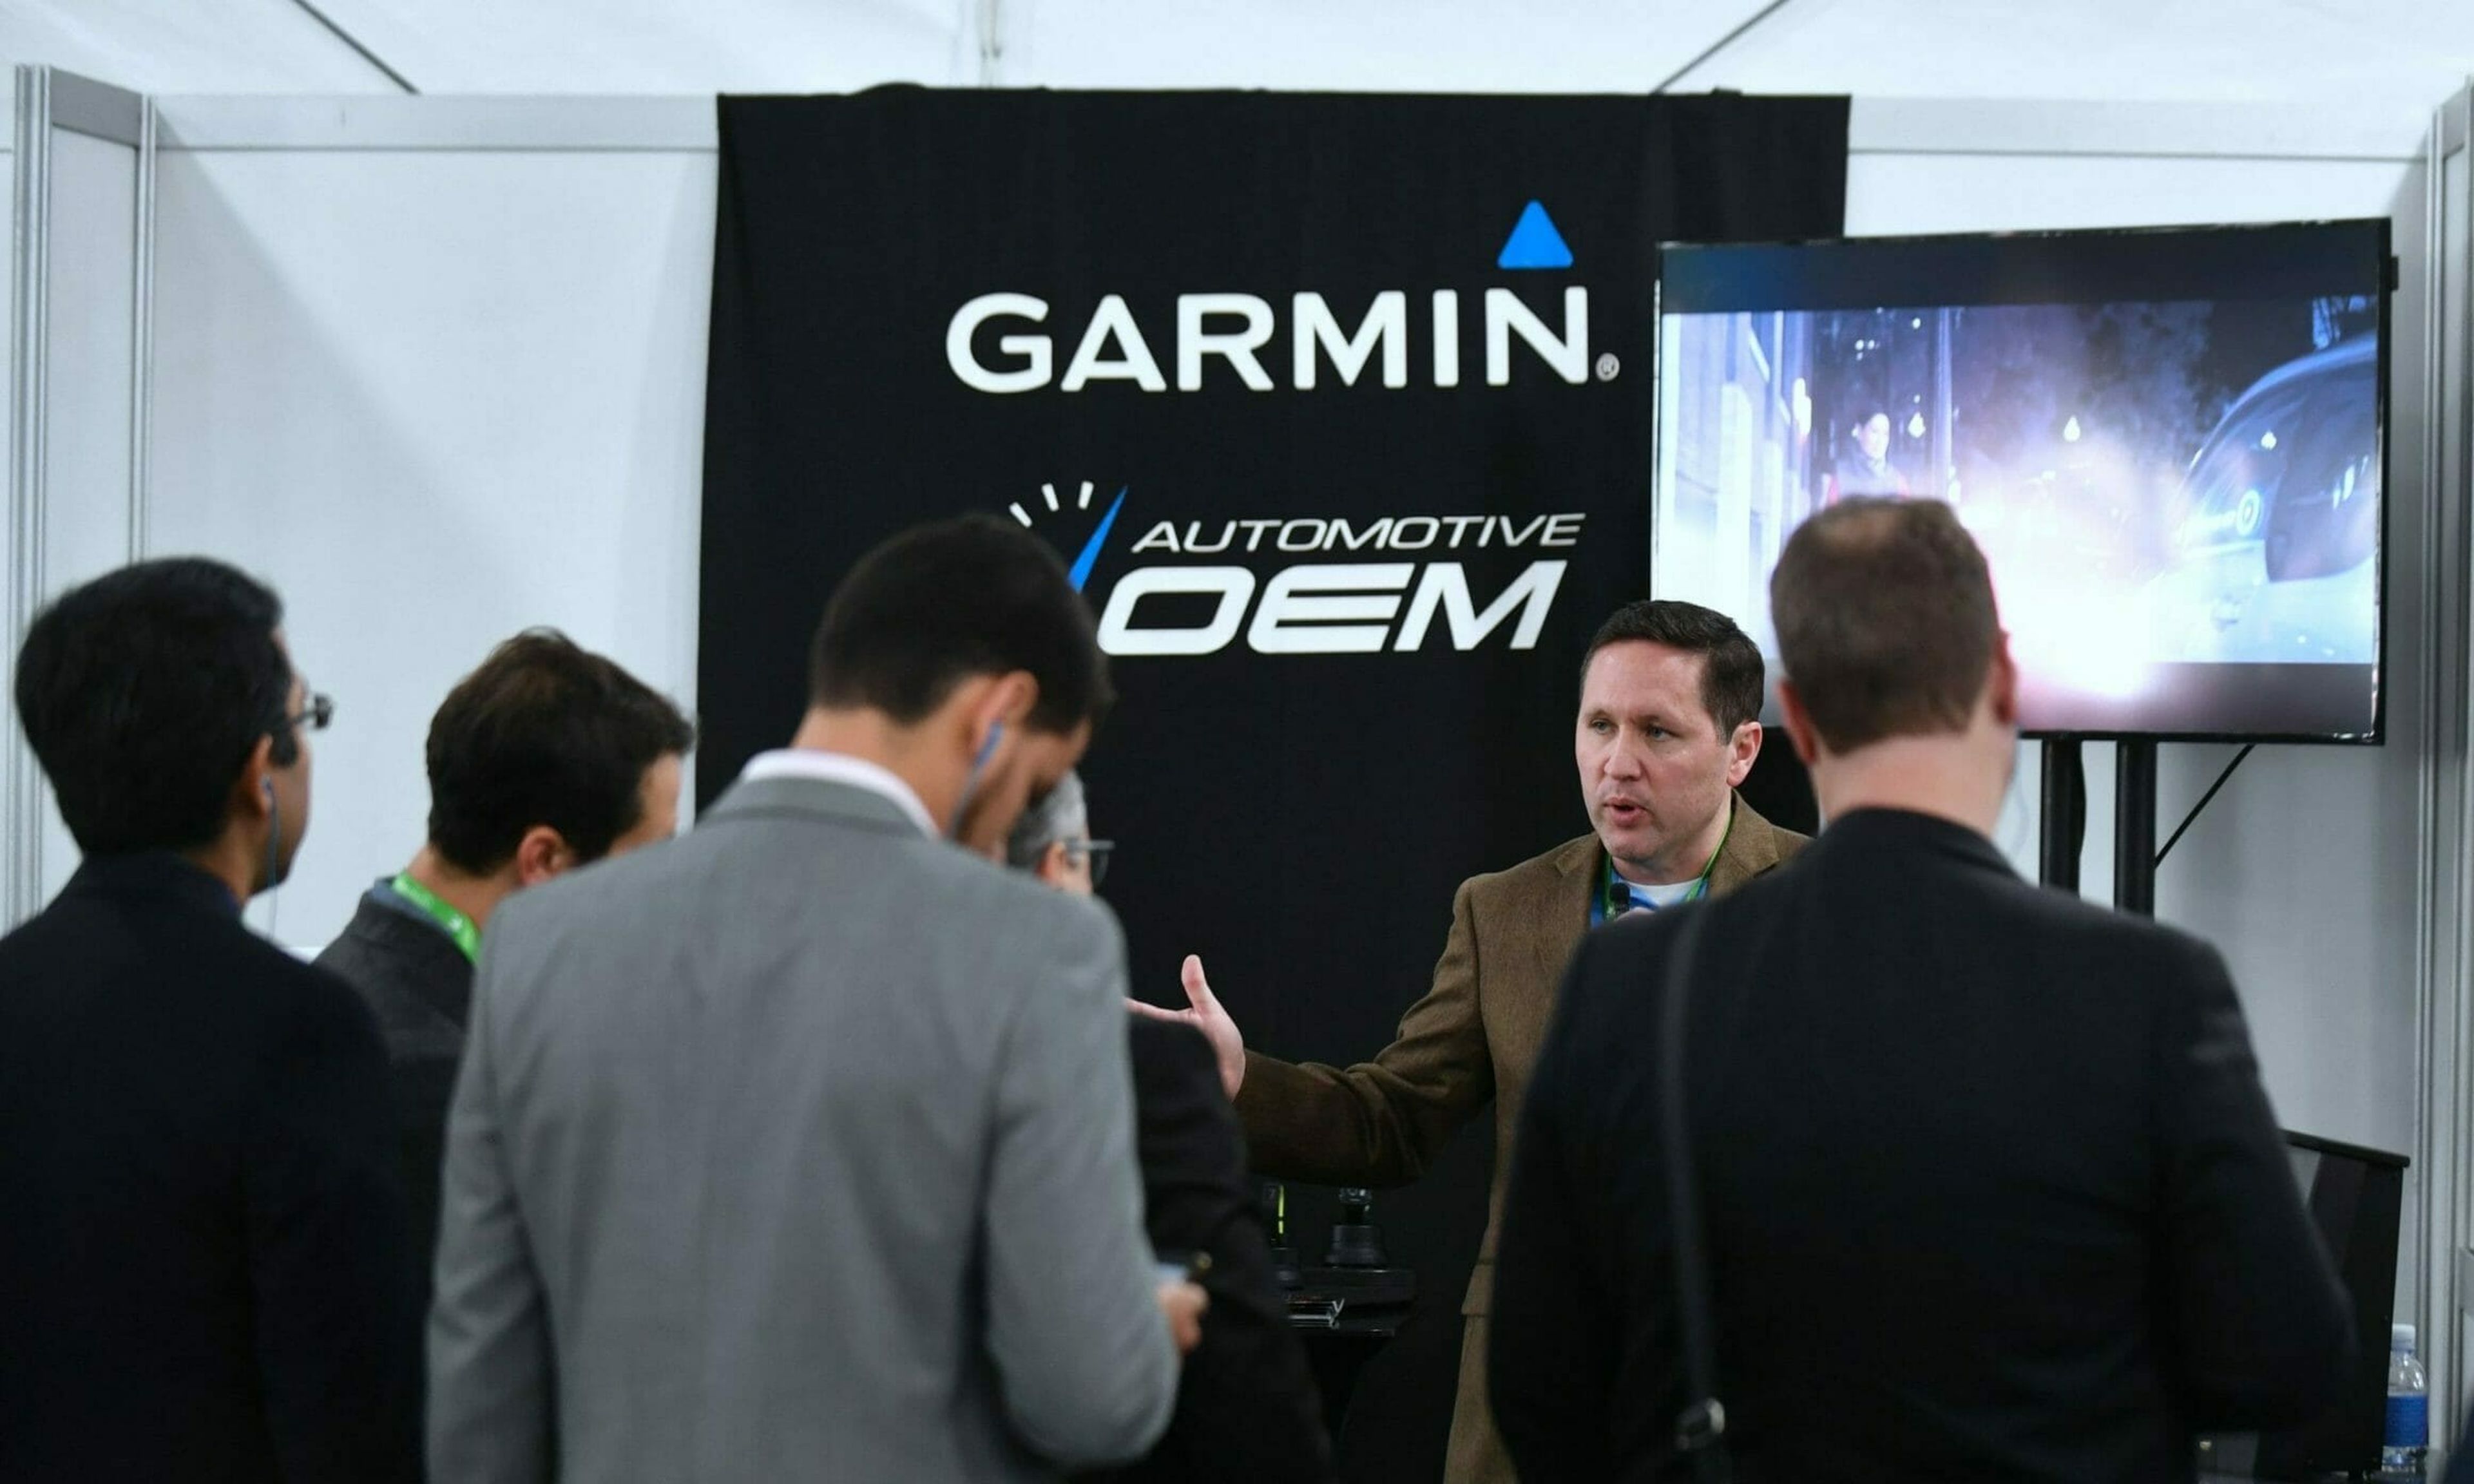 Garmin reportedly paid cybercriminals millions of dollars following a WastedLocker ransomware attack that shut down its systems for several days. Today’s columnist, Andy Jaquith of QOMPLX, offers security pros insight into how ransomware cases have gone from disruption to disaster – even a recent death in Germany. (Photo Credit: Frederic J. Brown/A...